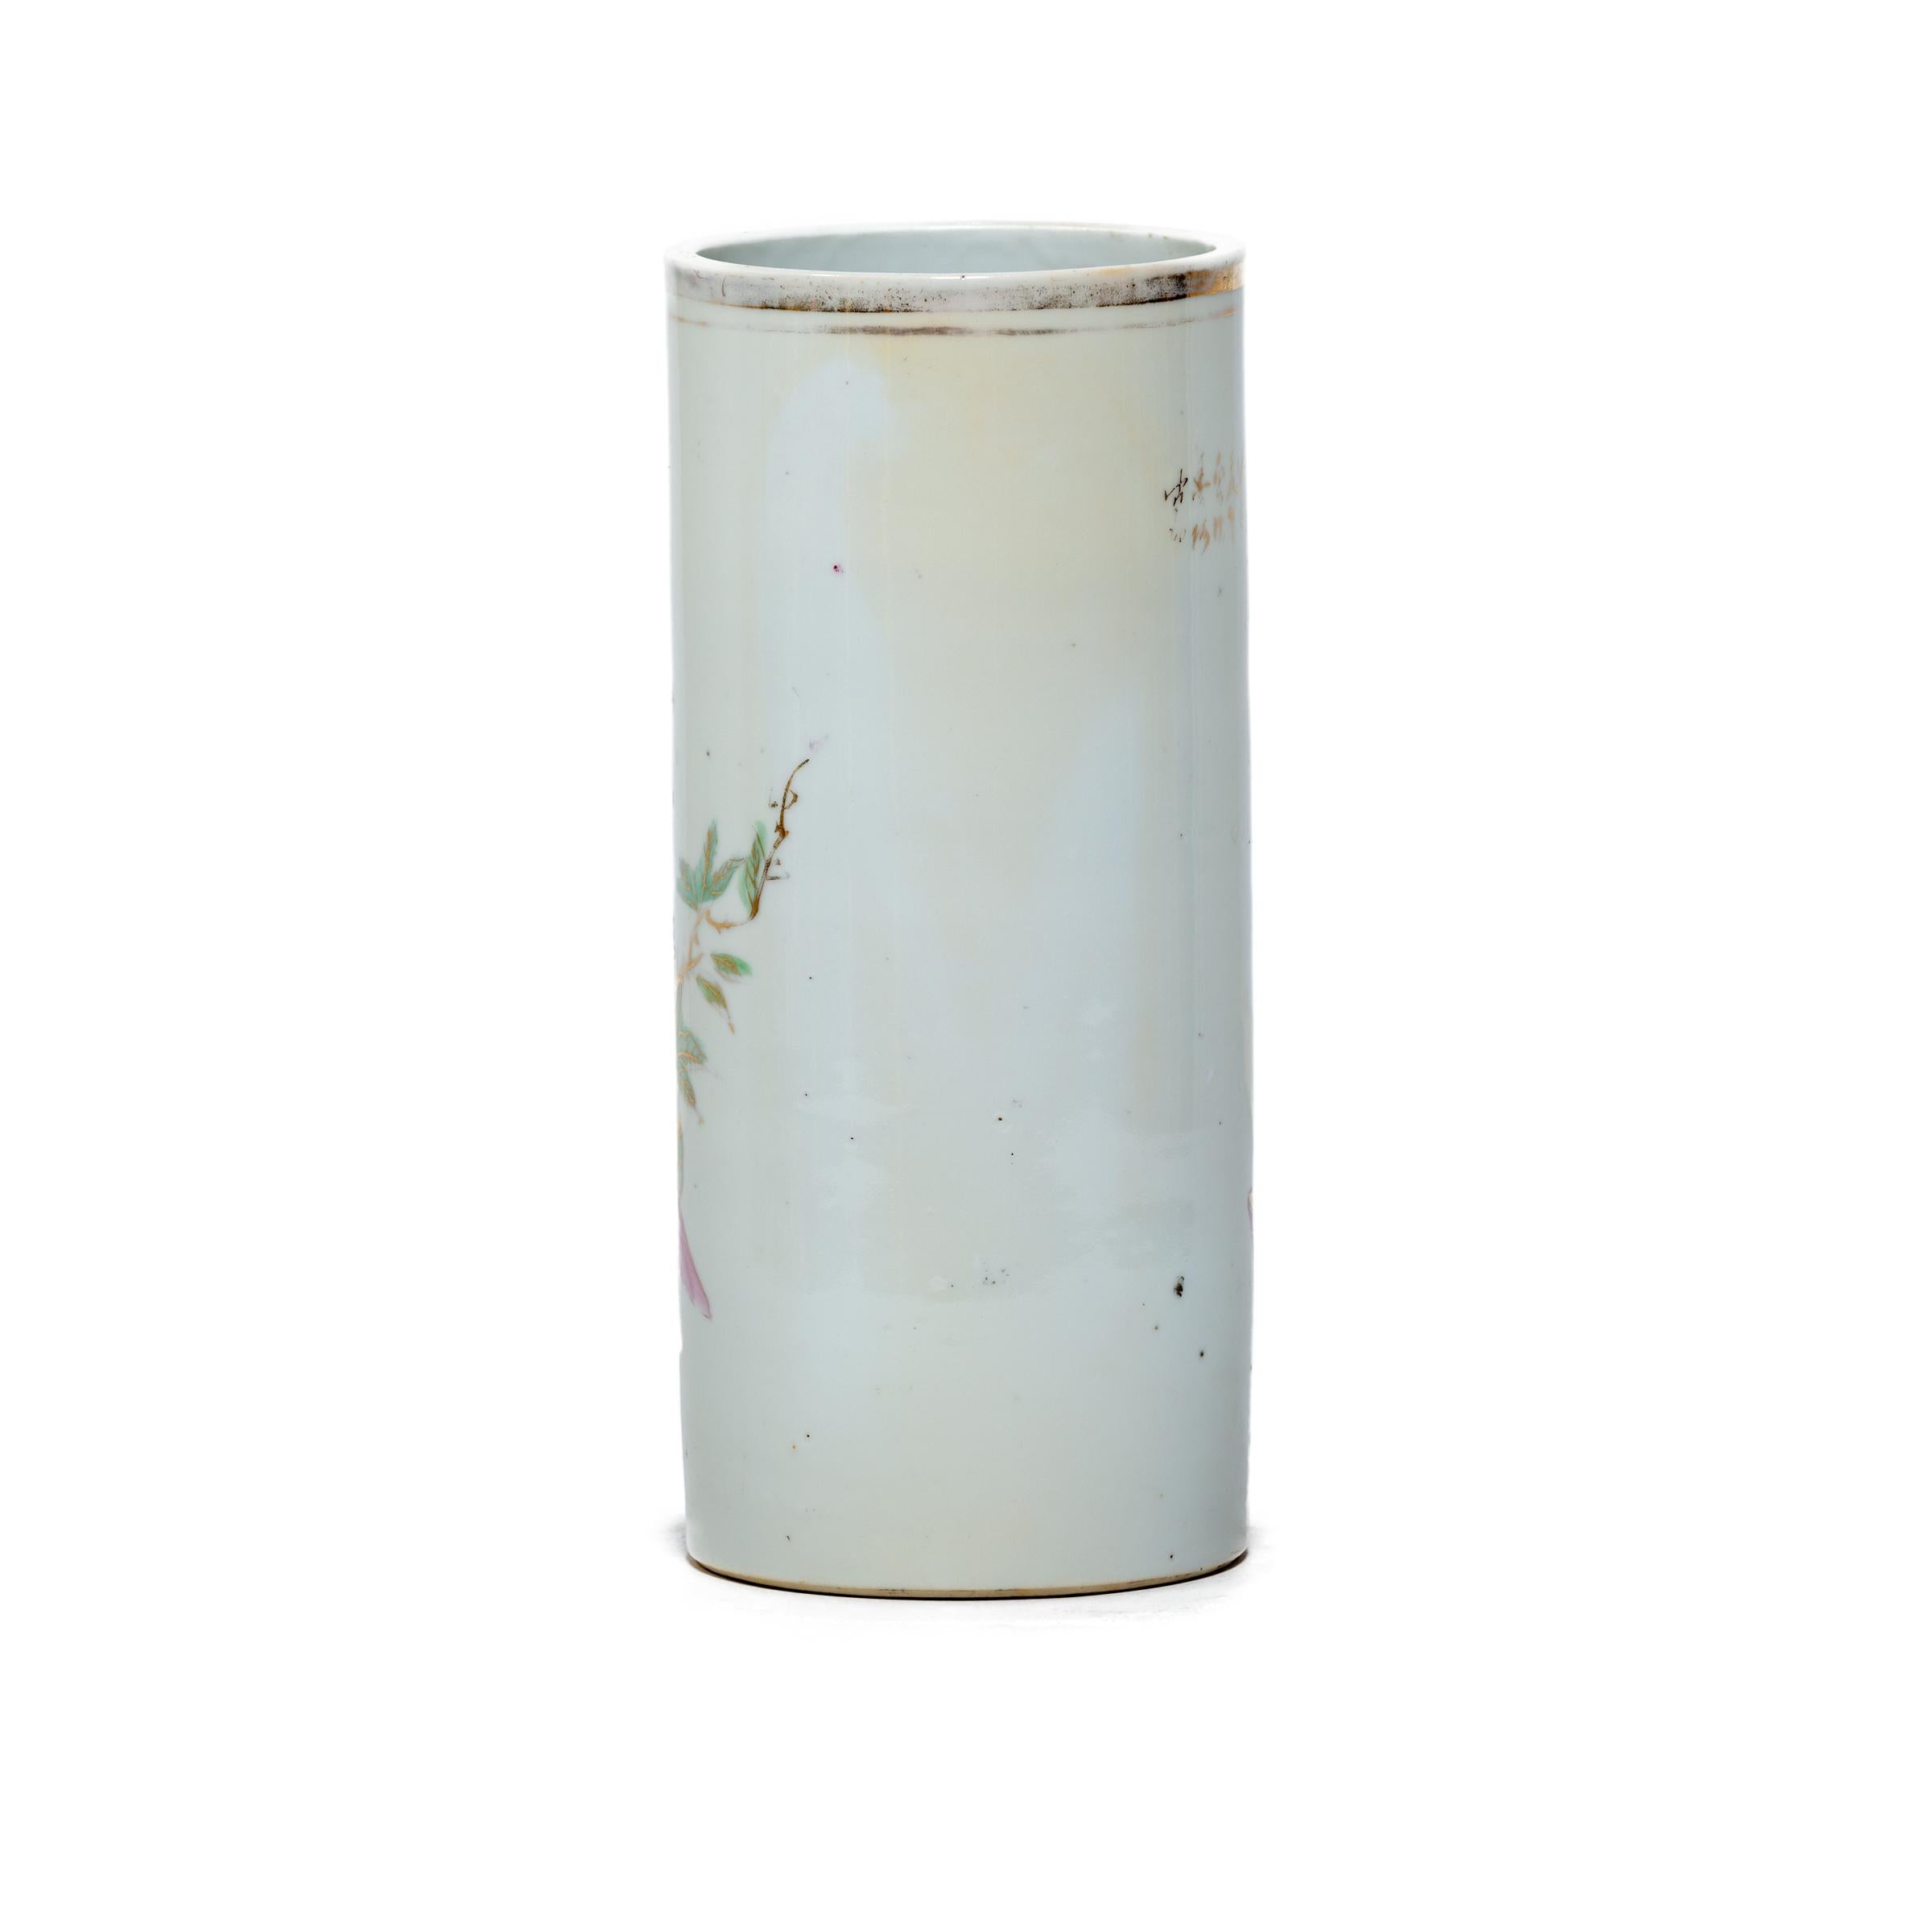 Qing Chinese Gilt Yi Tong Vase, c. 1850 For Sale